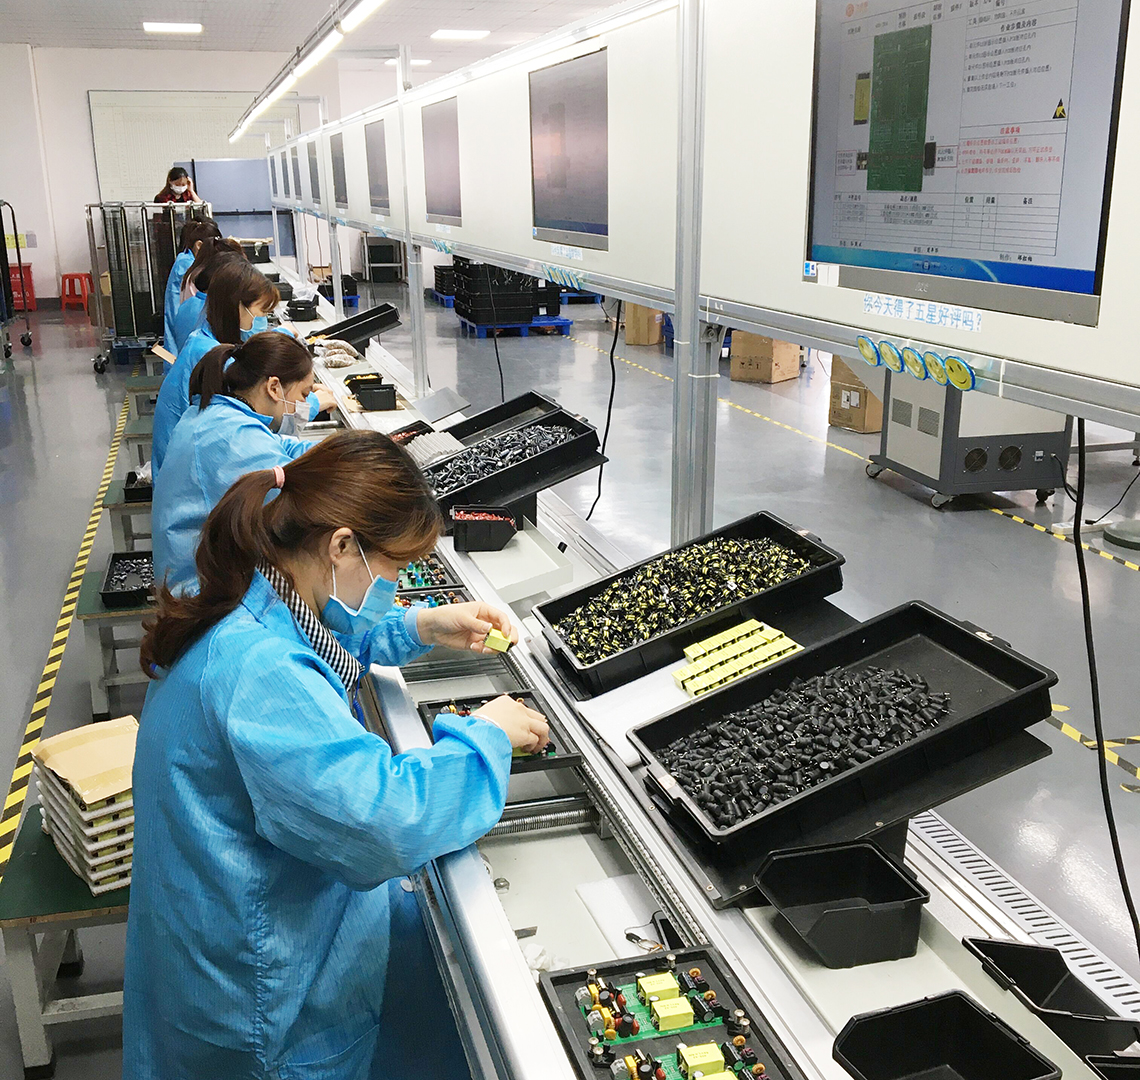 Shenzhen FYTLED Company has resumed work and production